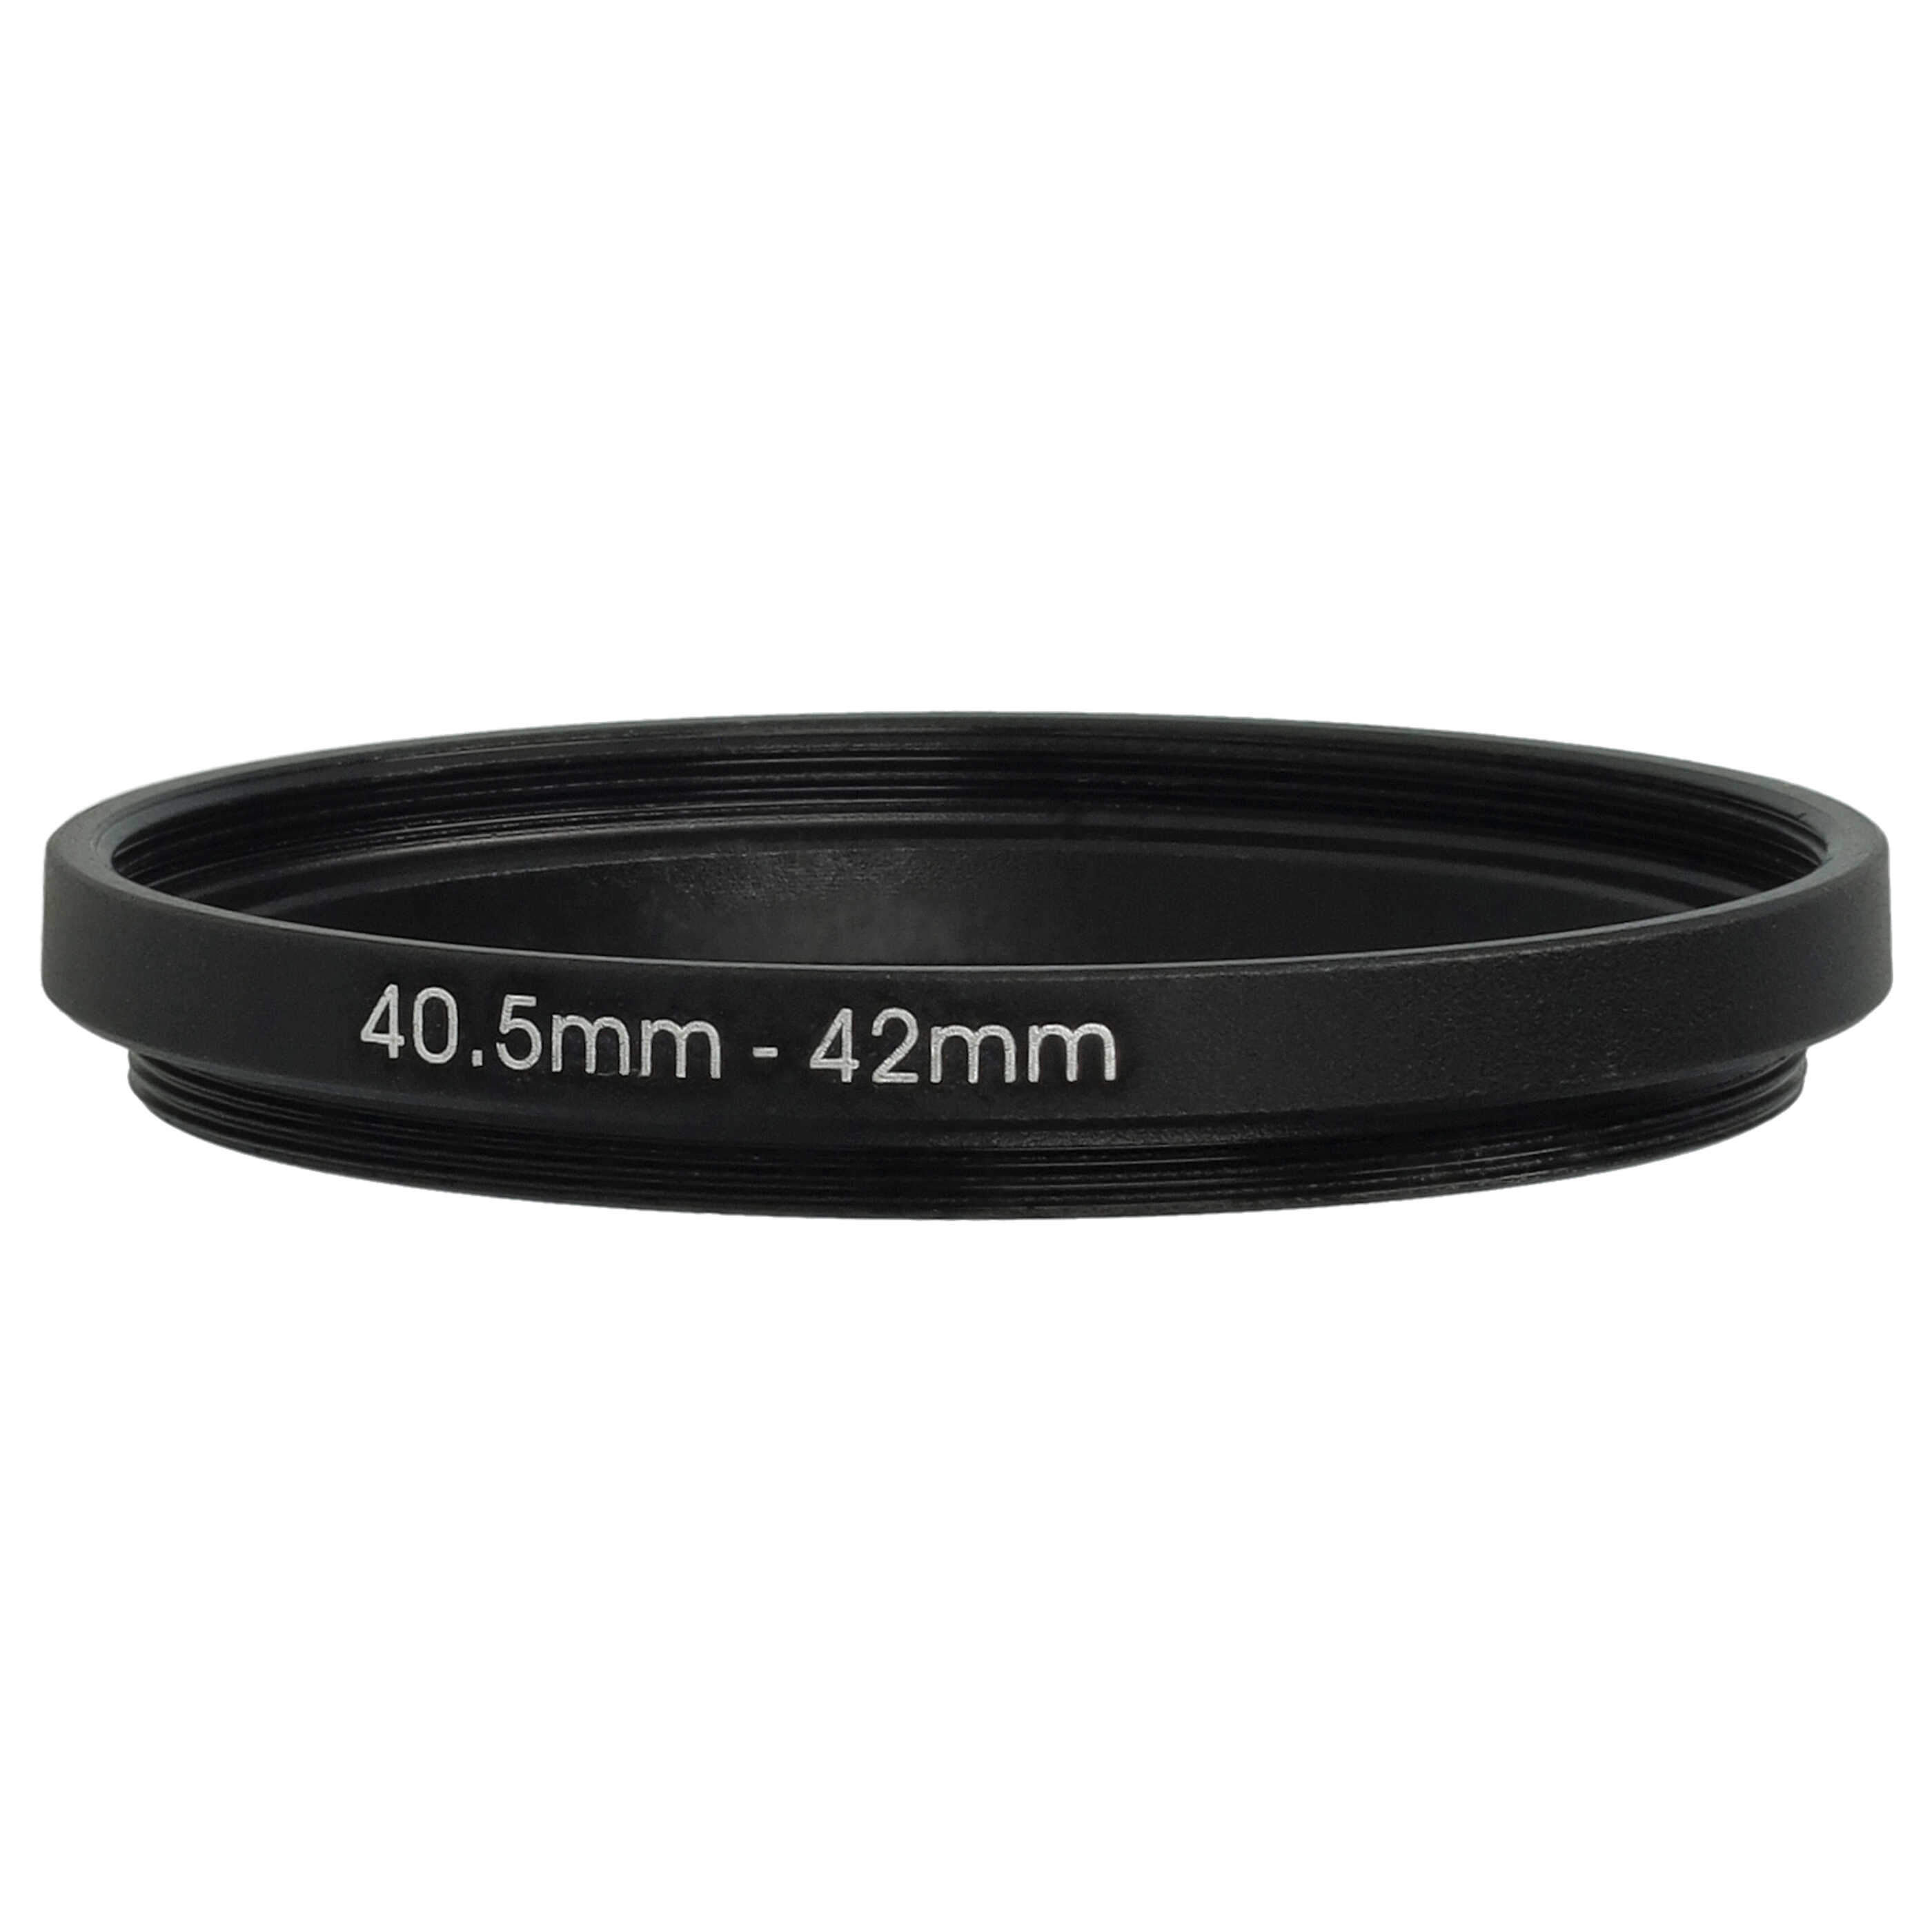 Step-Up Ring Adapter of 40.5 mm to 42 mmfor various Camera Lens - Filter Adapter